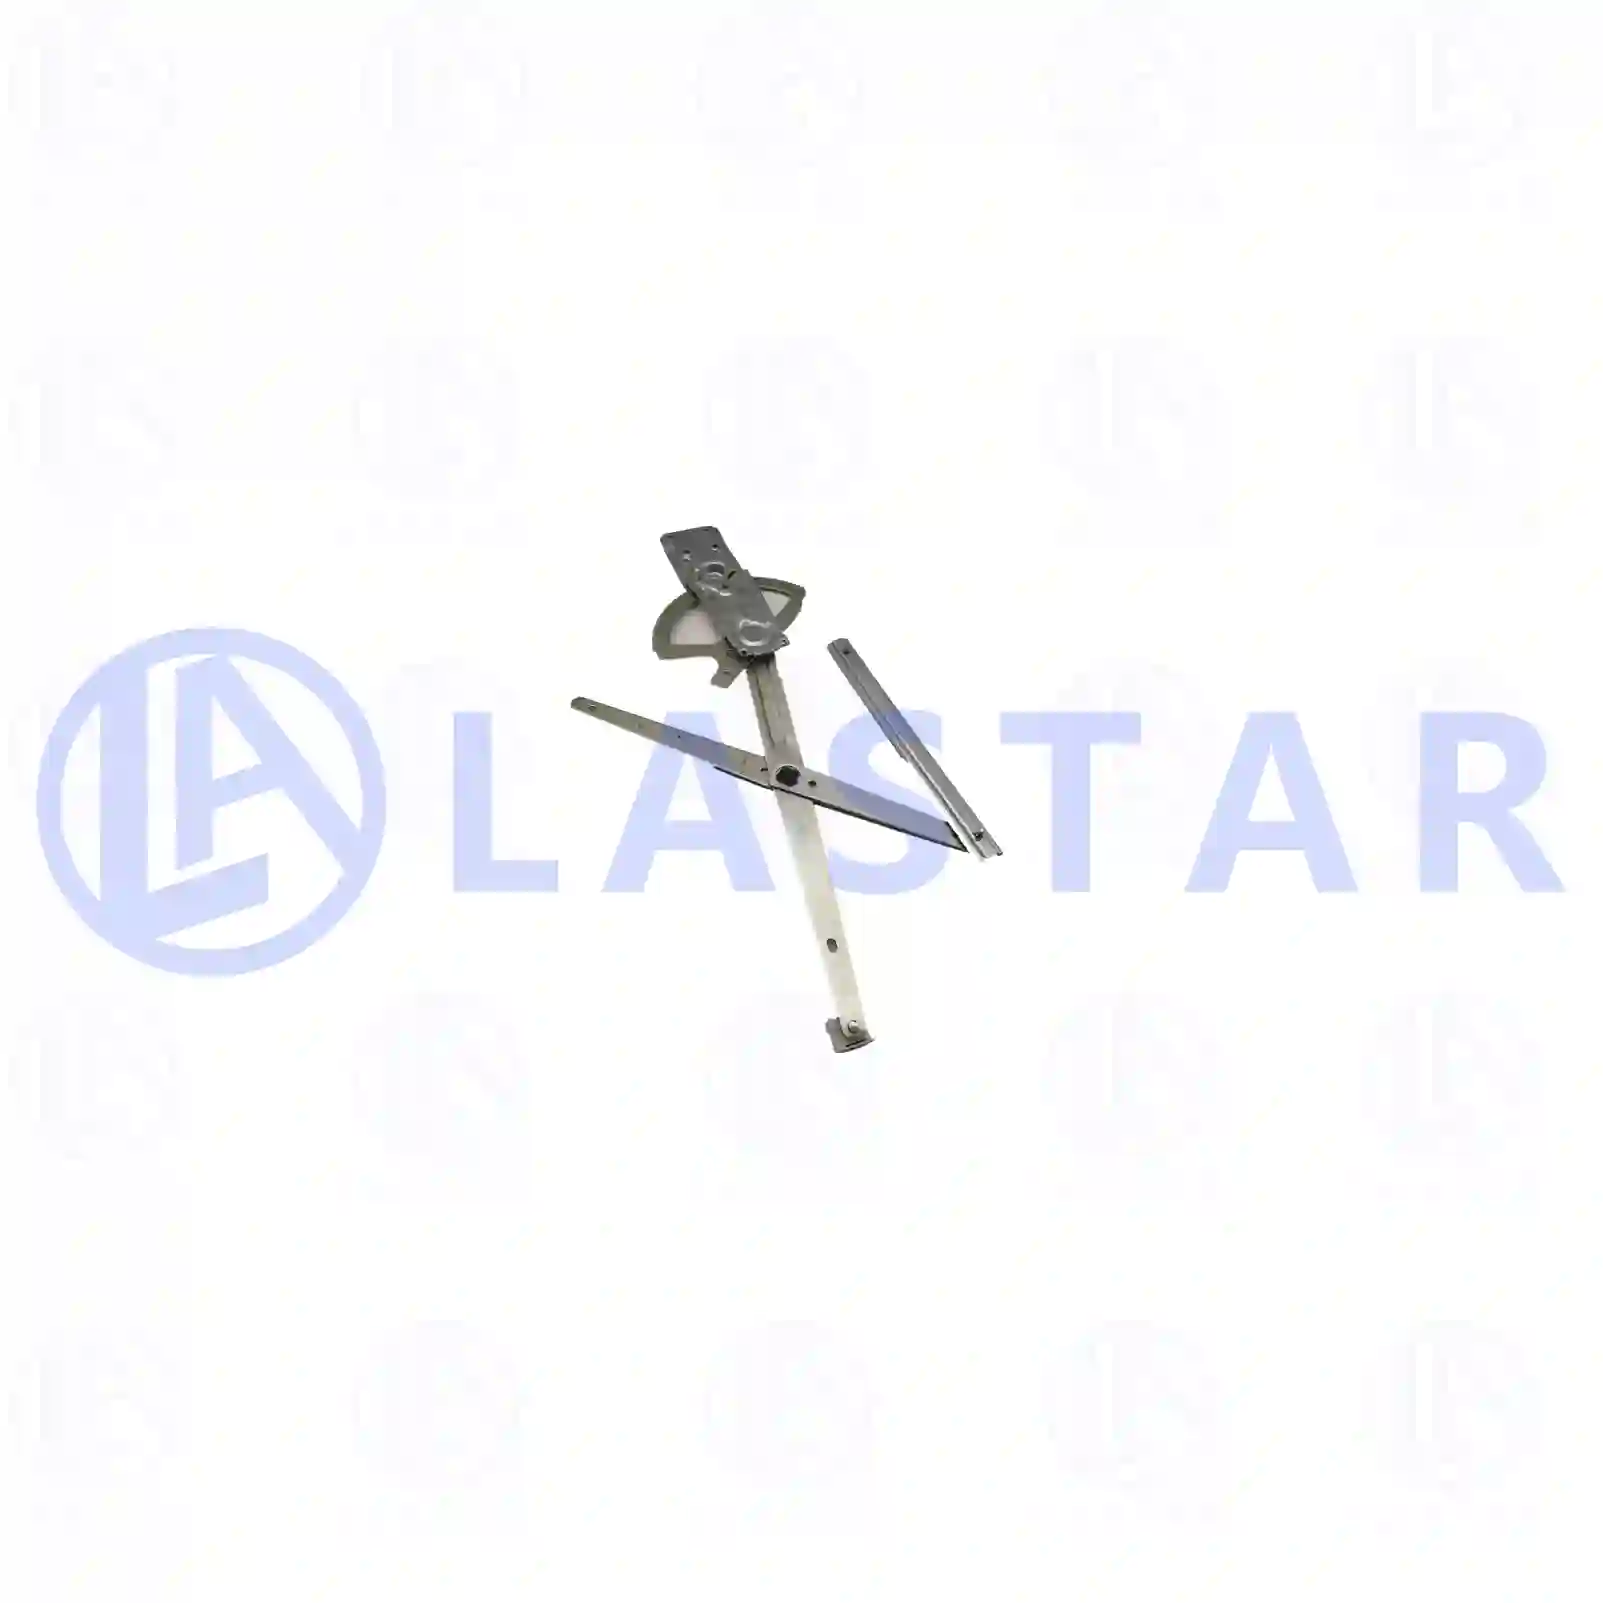 Window regulator, electrical, right, 77718760, 7250102 ||  77718760 Lastar Spare Part | Truck Spare Parts, Auotomotive Spare Parts Window regulator, electrical, right, 77718760, 7250102 ||  77718760 Lastar Spare Part | Truck Spare Parts, Auotomotive Spare Parts